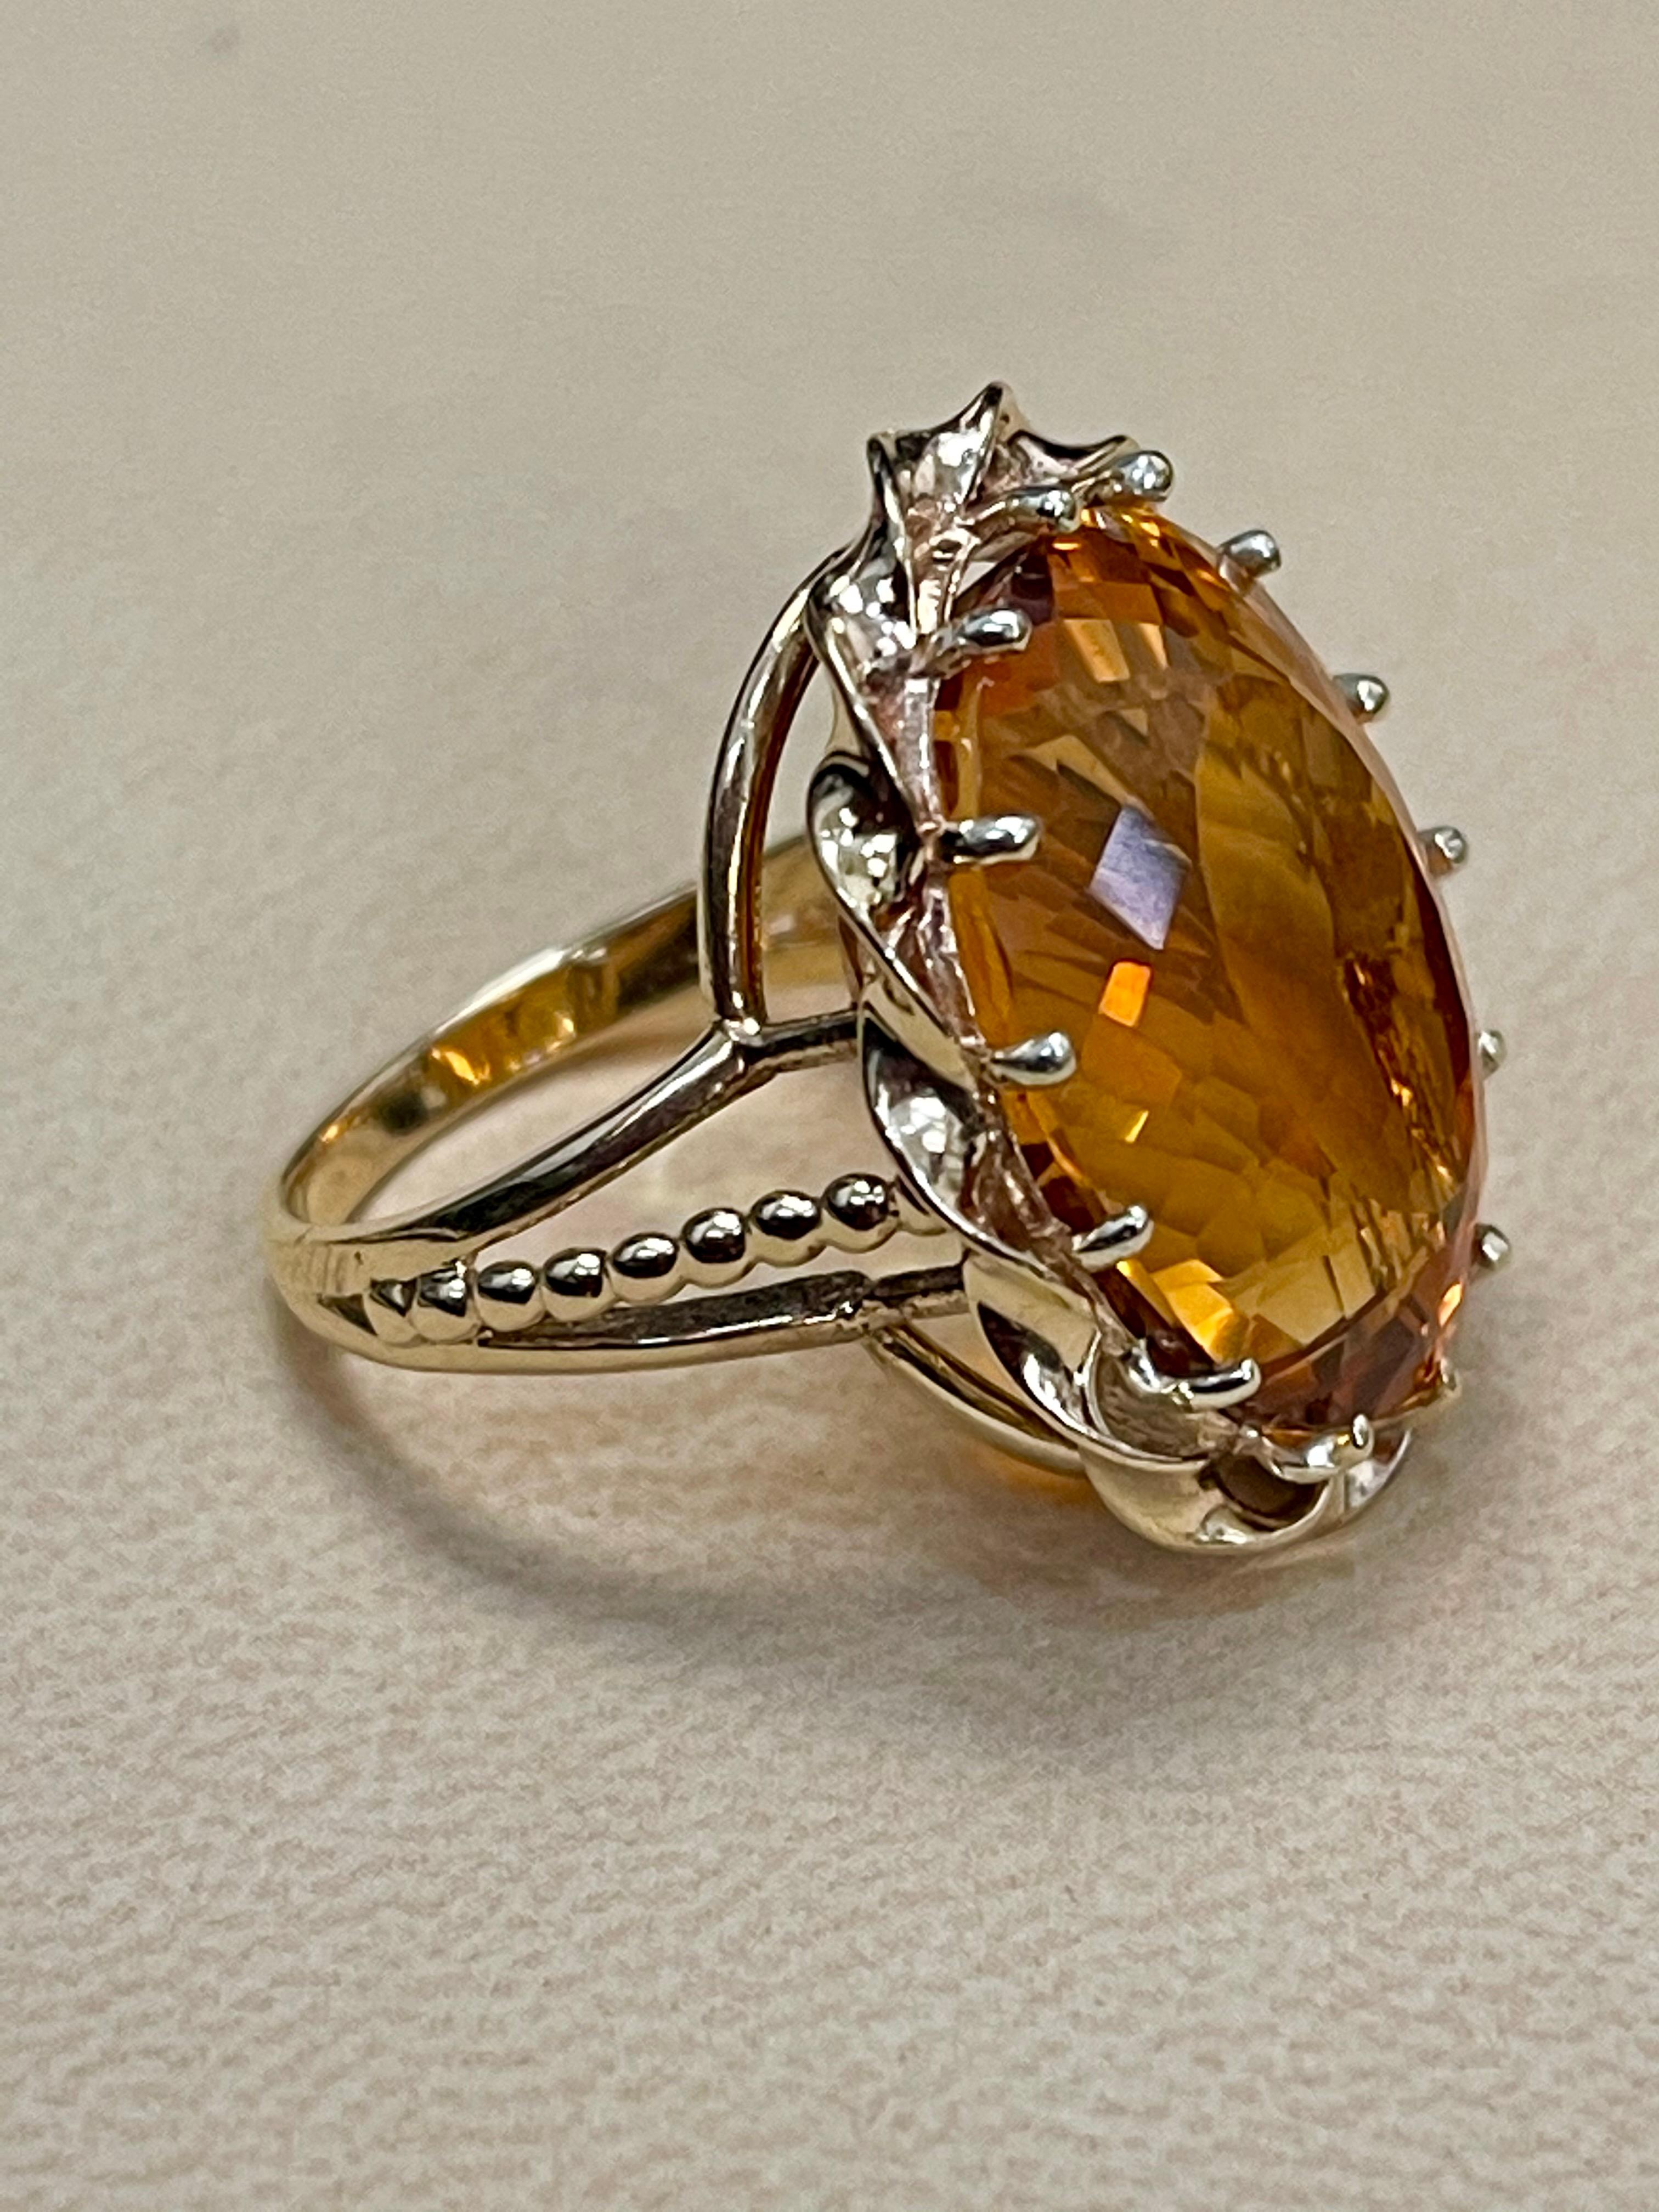 32 Carat Natural Oval Citrine Cocktail Ring in 14 Karat Yellow Gold, Estate In Excellent Condition For Sale In New York, NY